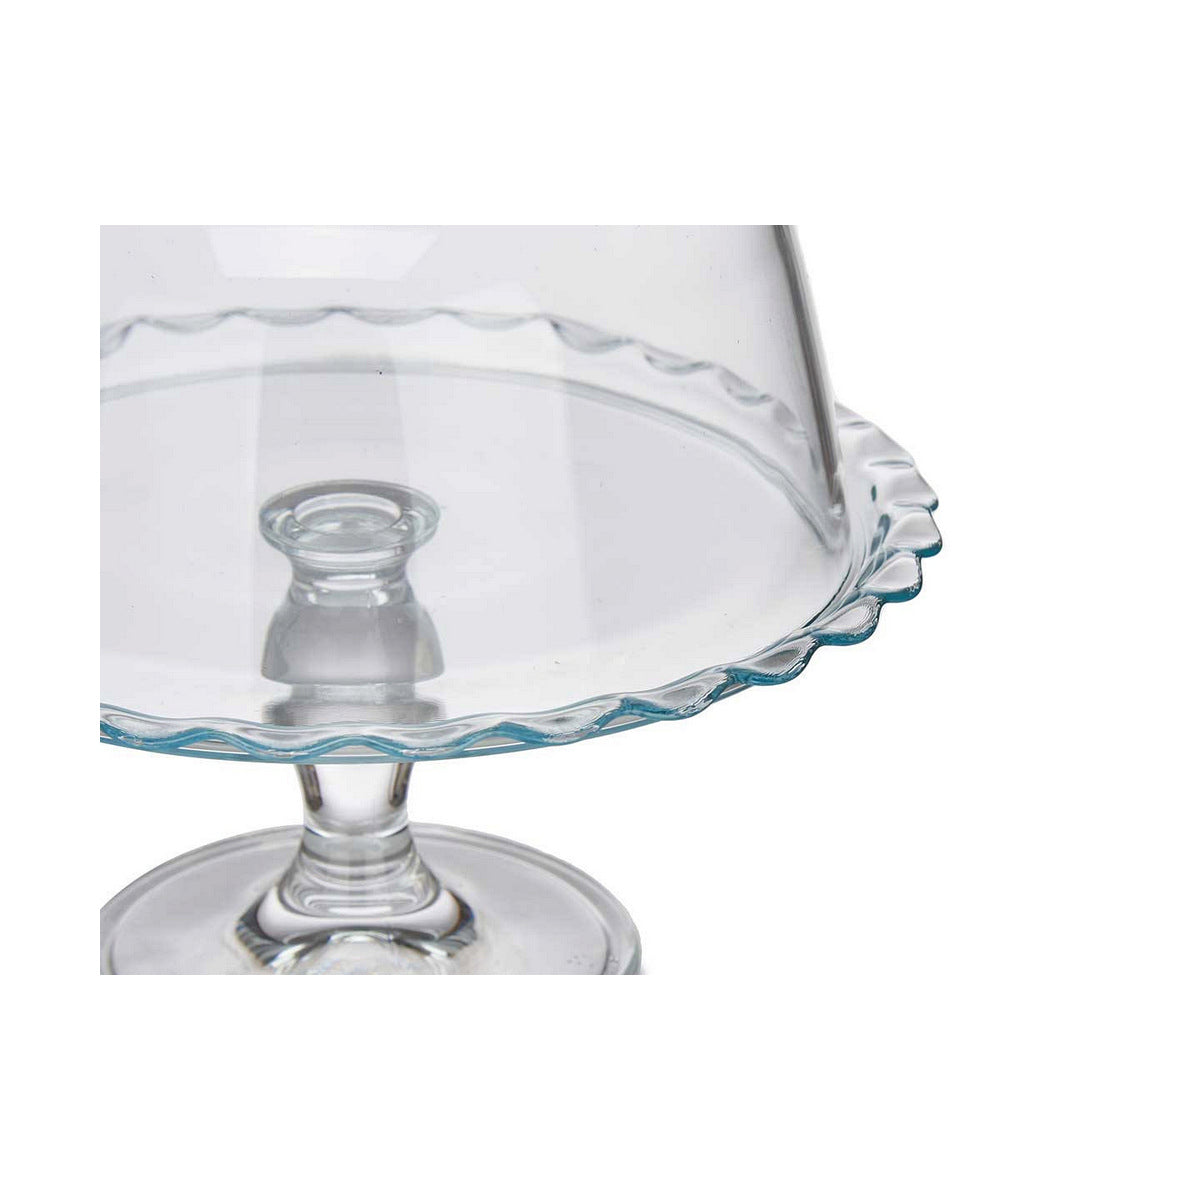 Pasabahce Petit Patisserie Cake Dome 26.4x26cm with Serving Base Tray Footed 23095